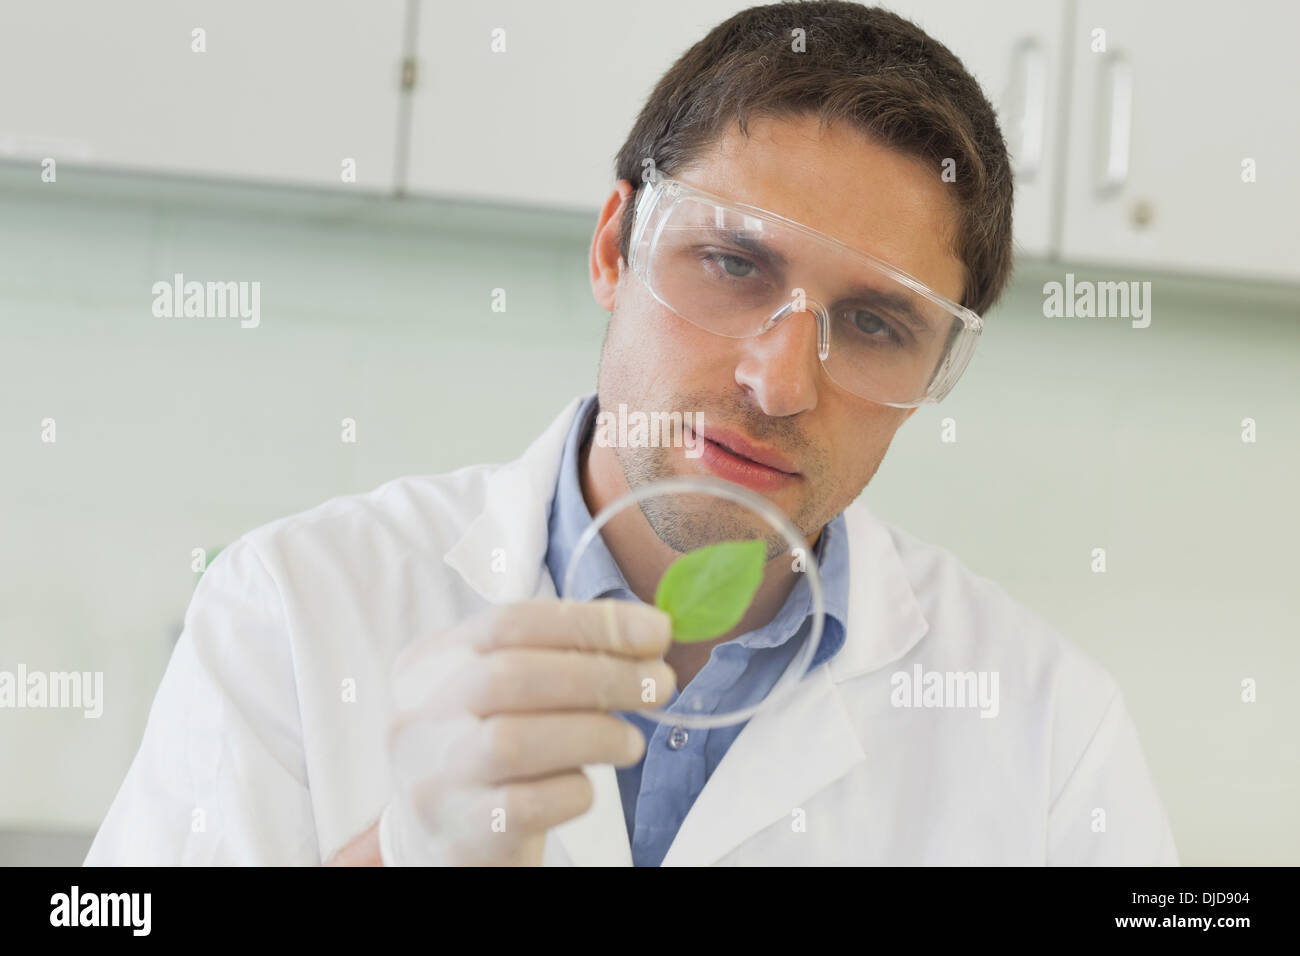 Young male scientist looking at a petri dish Banque D'Images